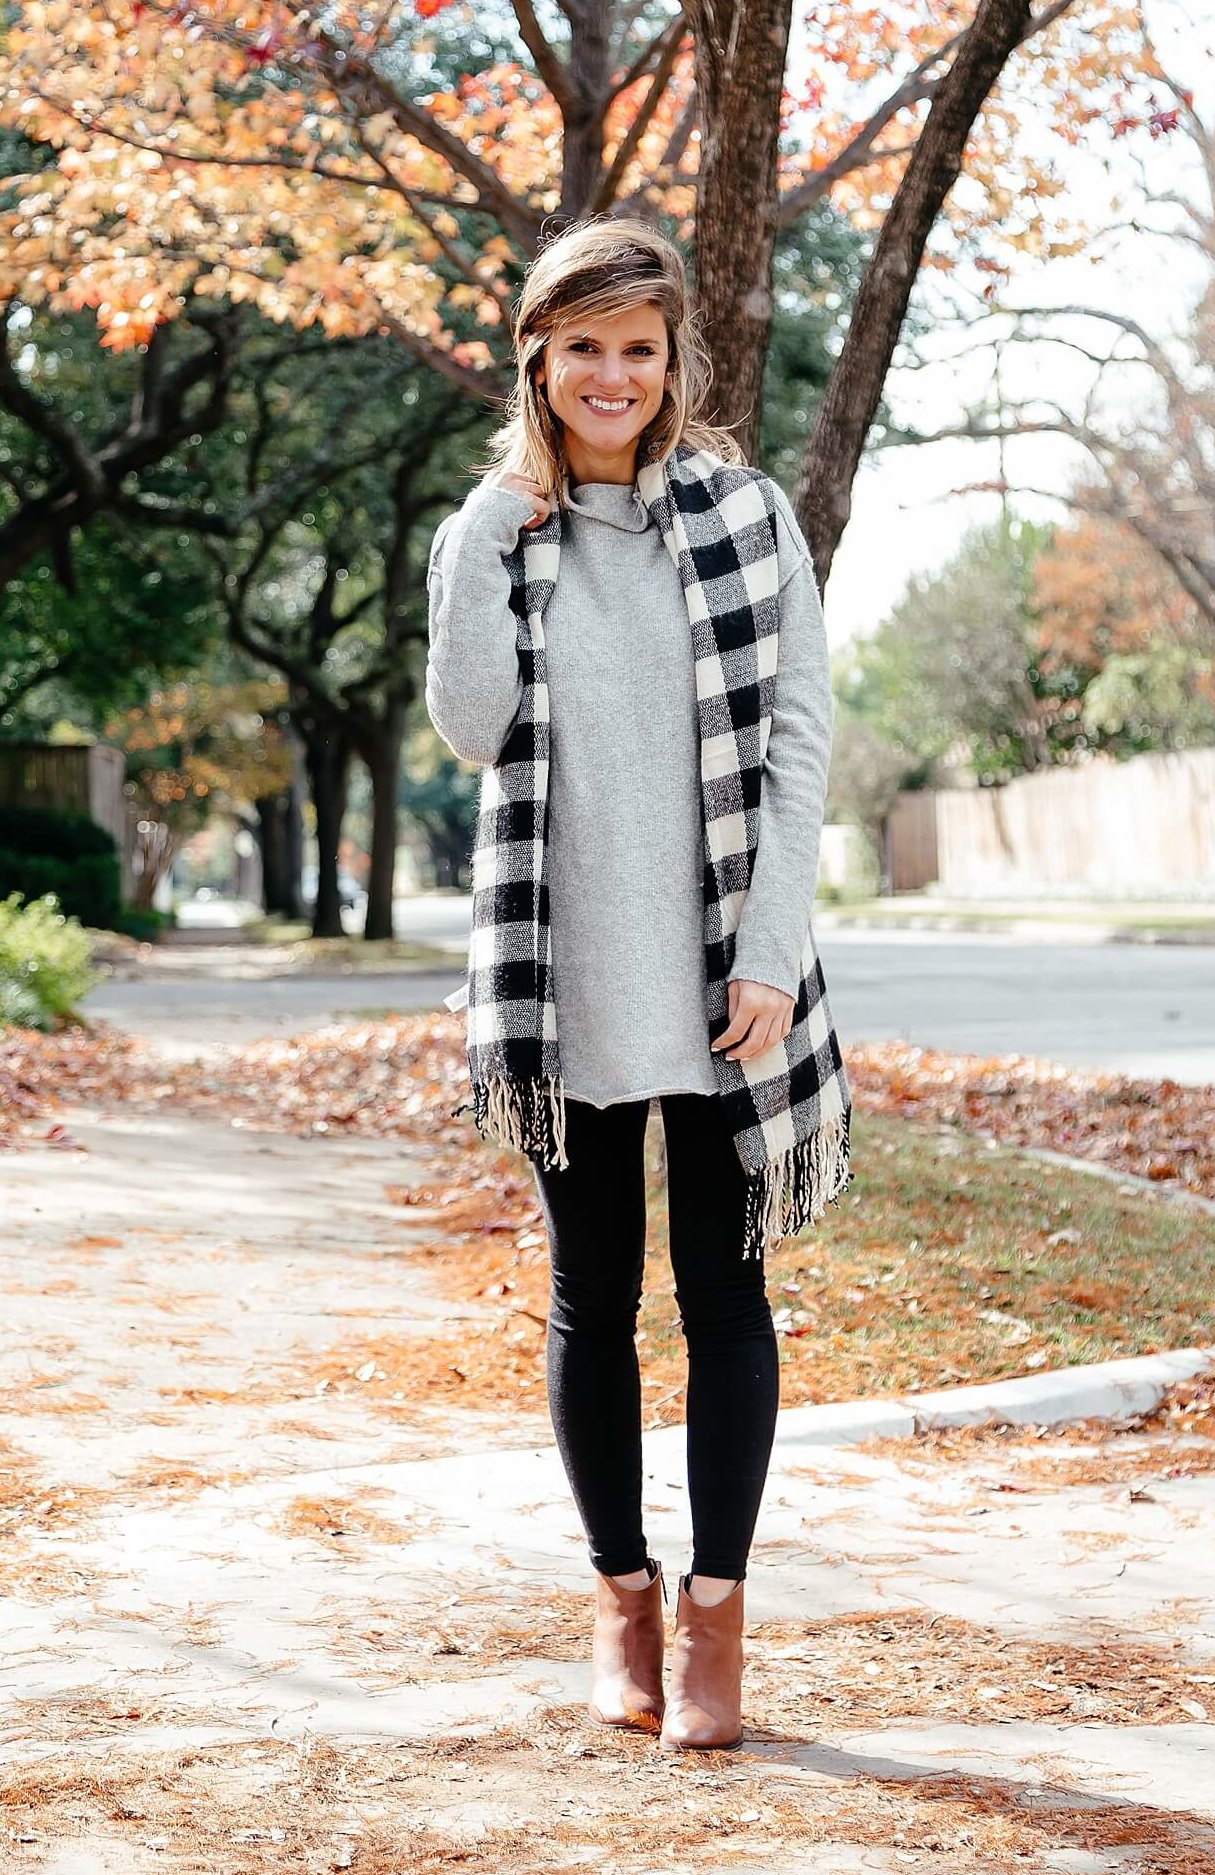 Tunic Sweater to Wear with Leggings - SimplyChristianne